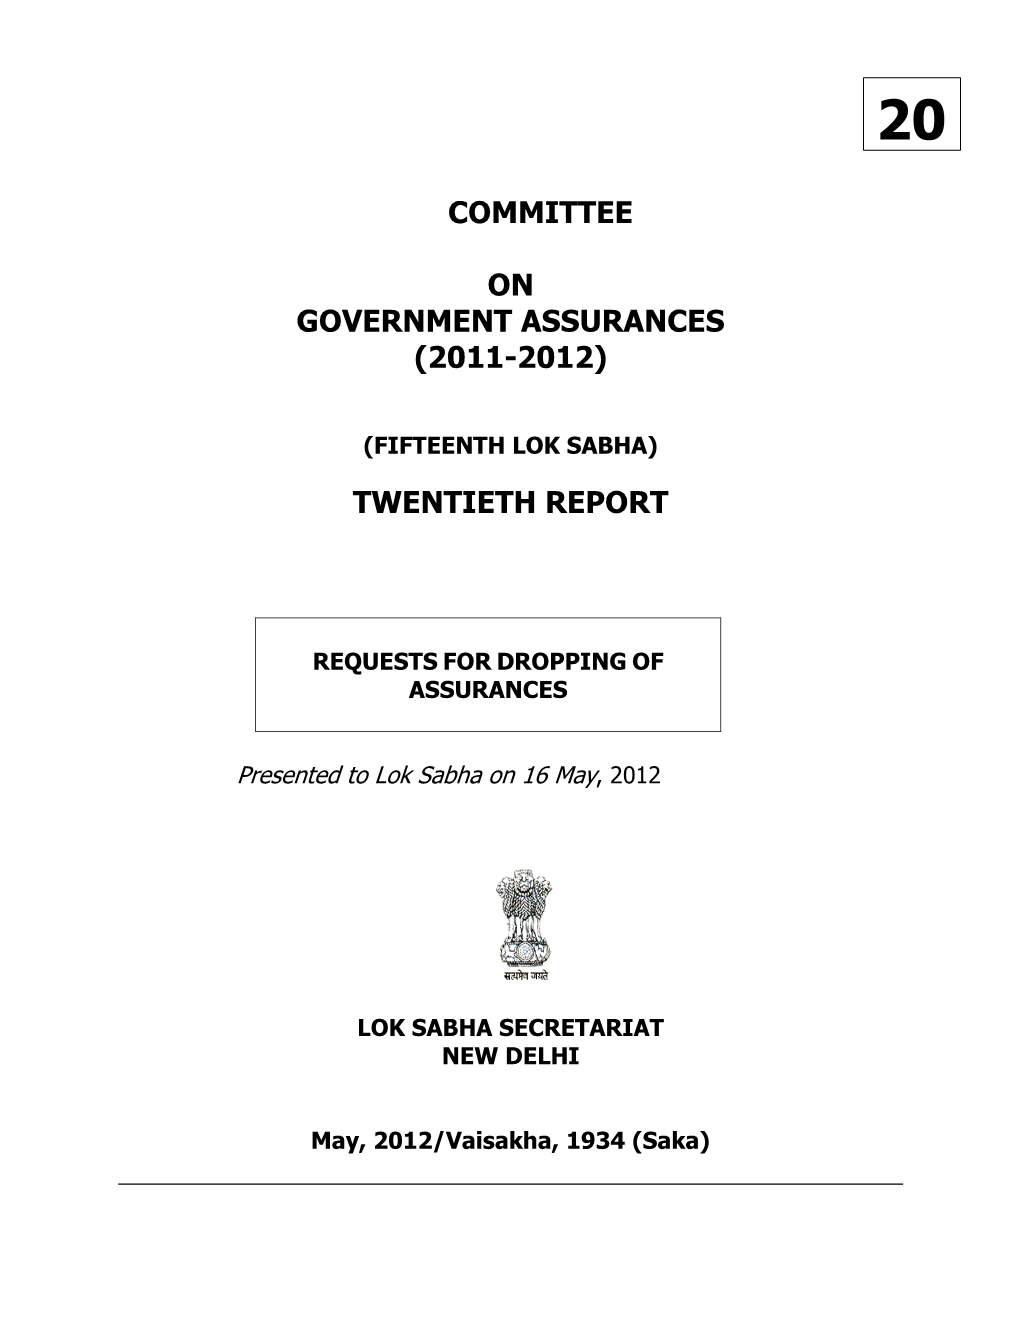 Committee on Government Assurances* (2011 - 2012)